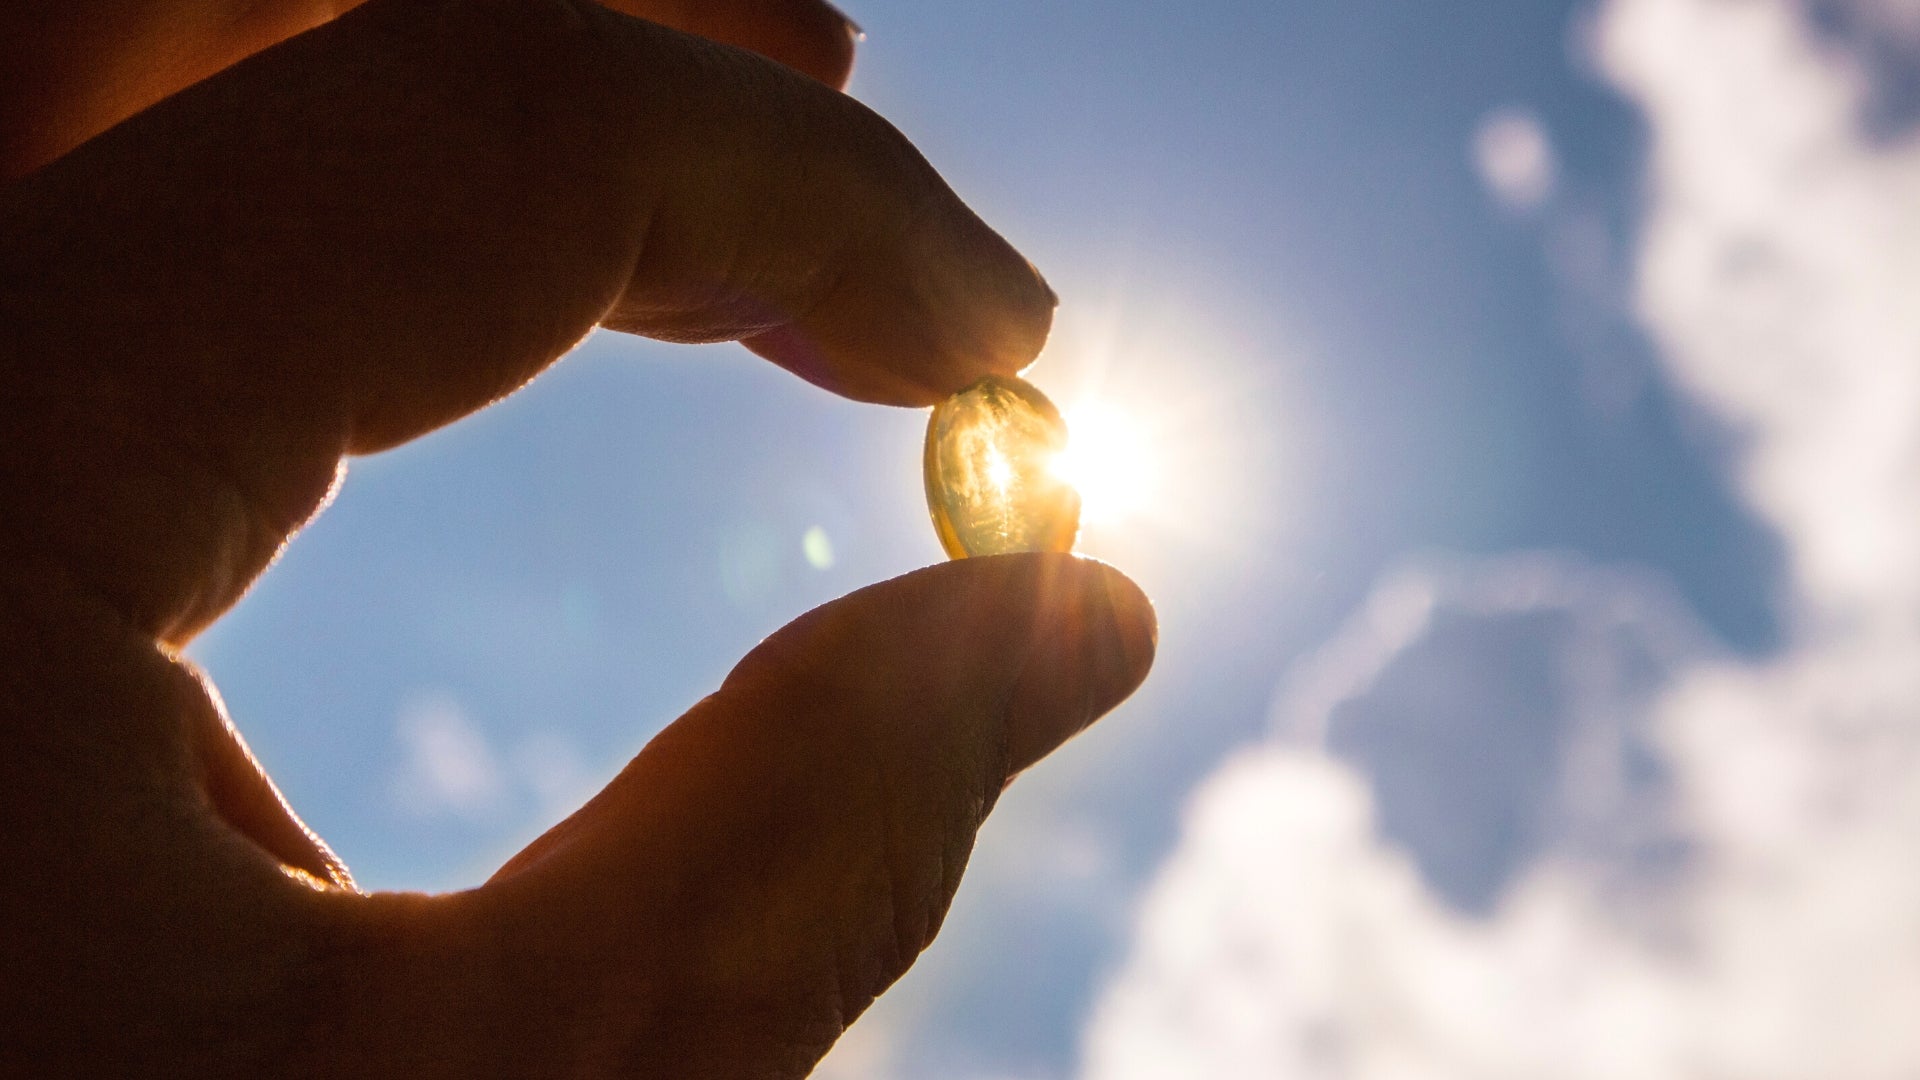 Two fingers holding up a vitamin d capsule against the sun